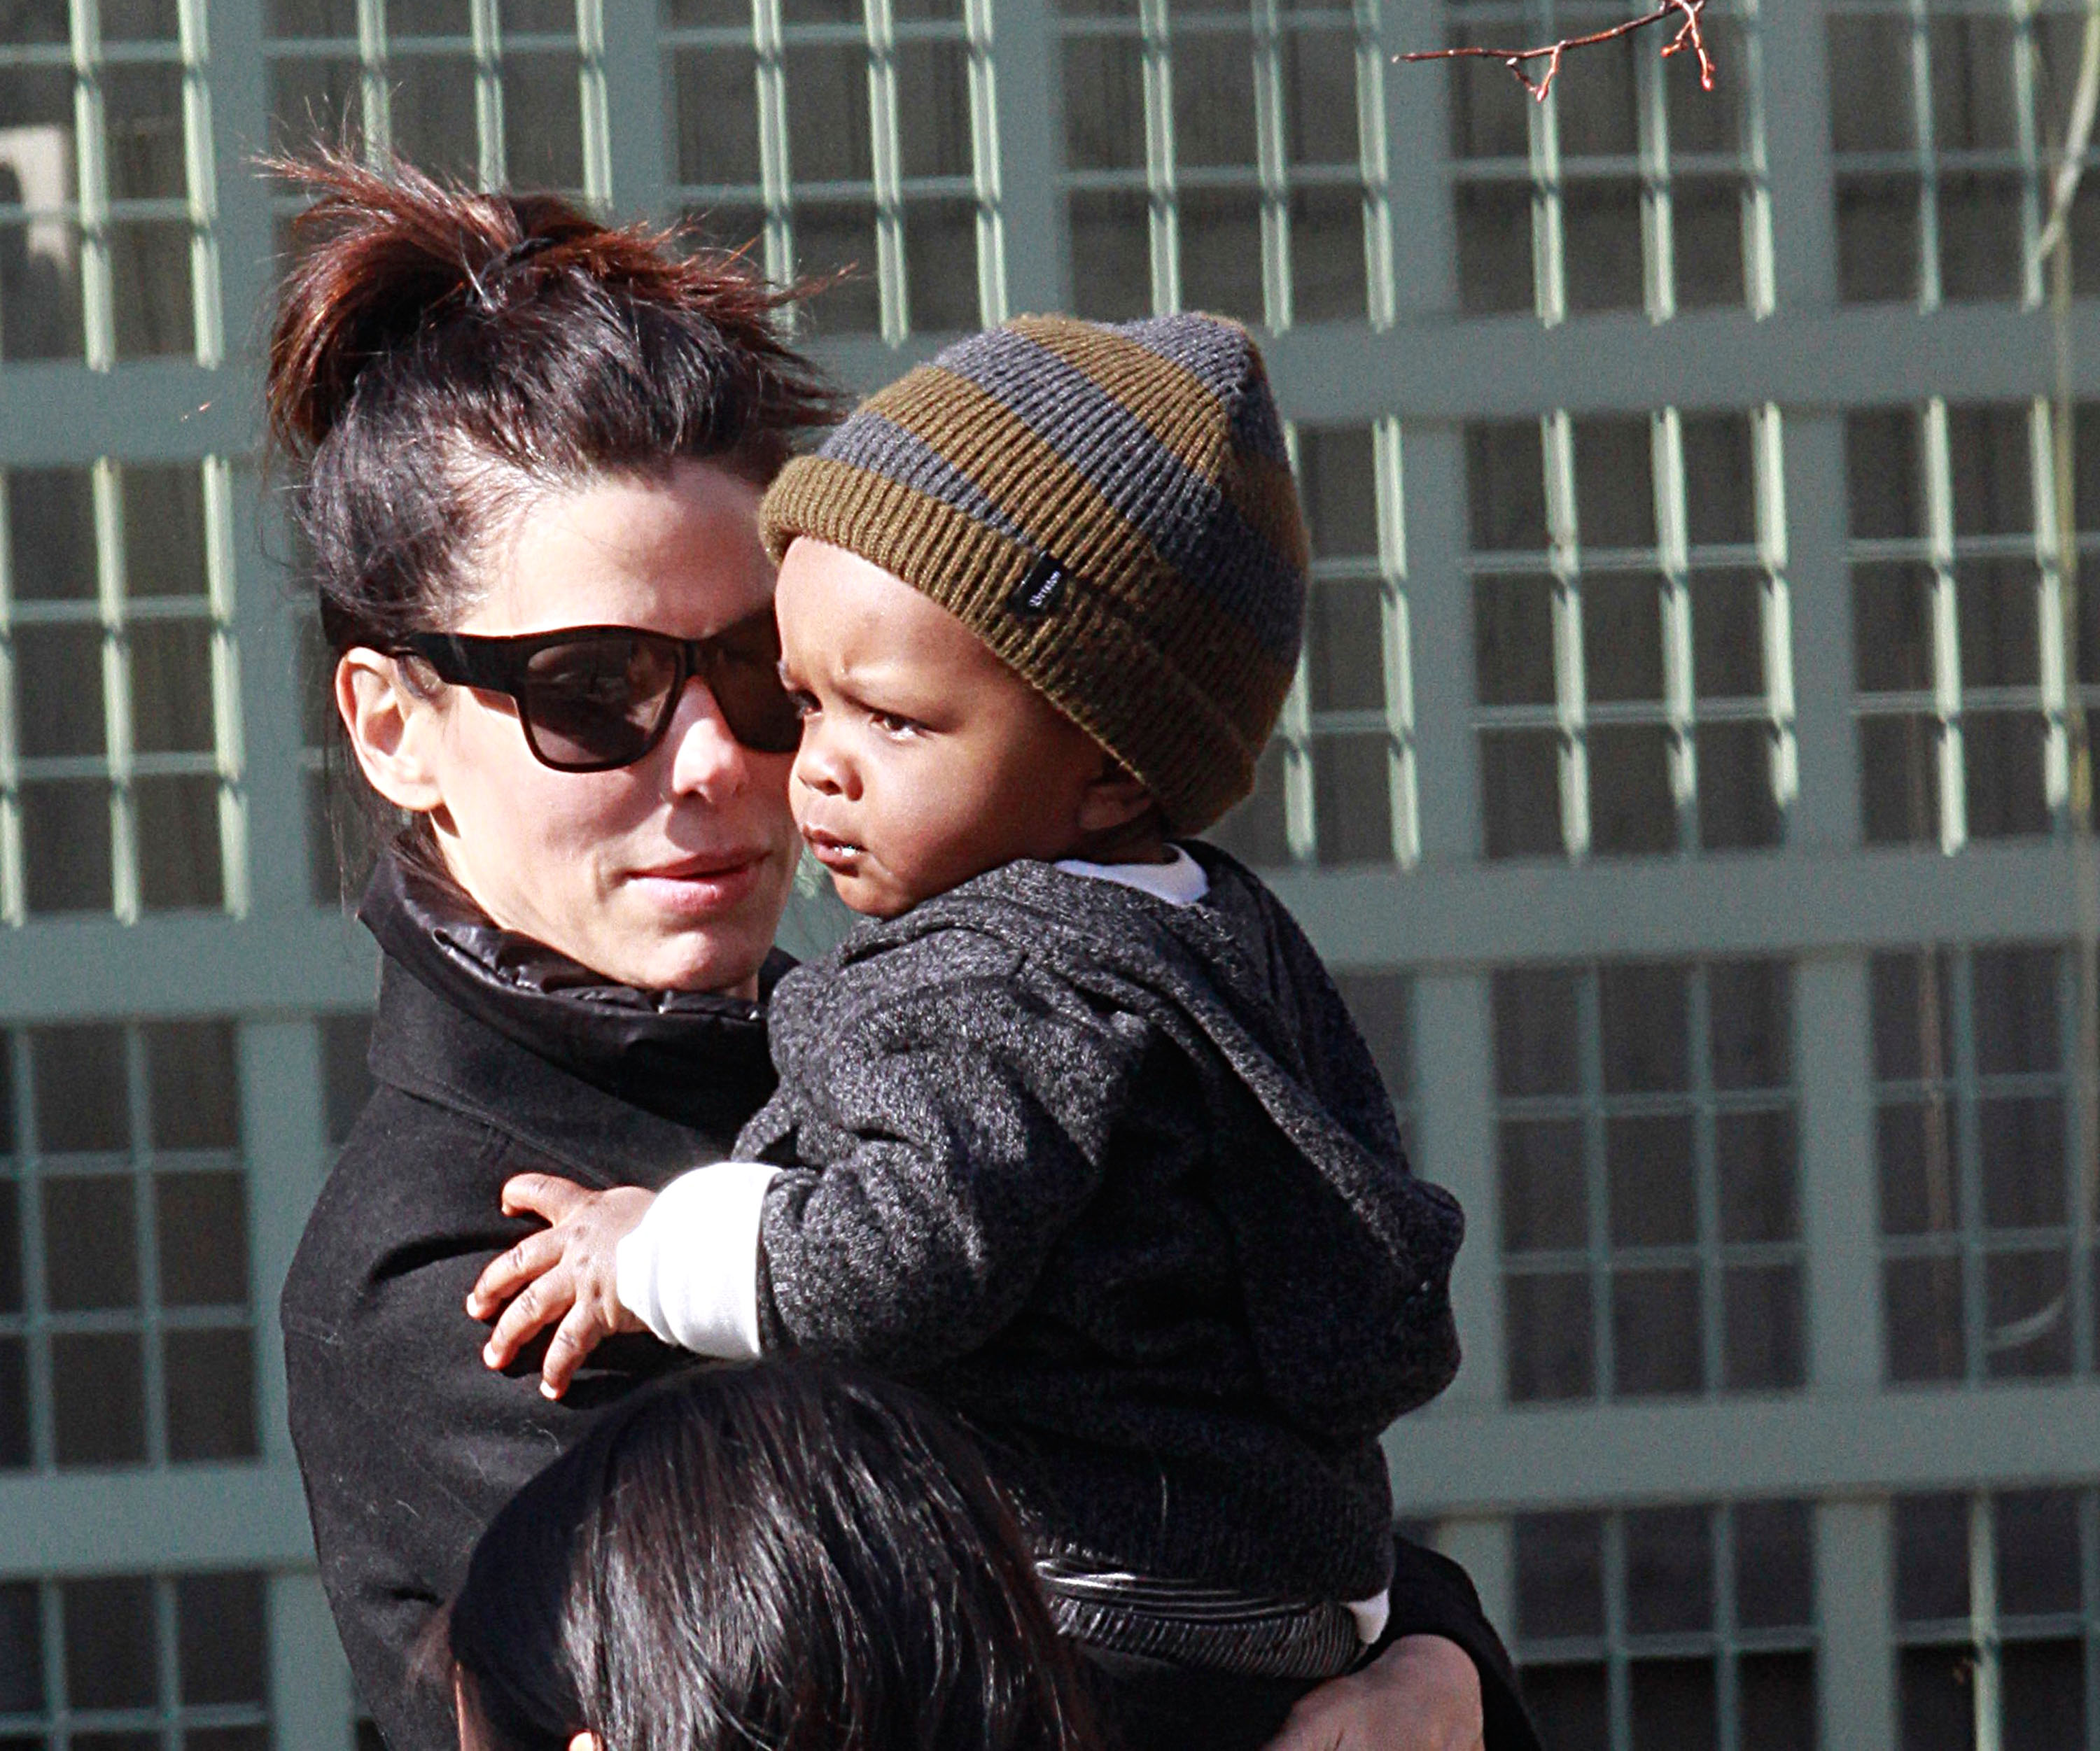 Sandra Bullock and her son Louis Bullock seen on the streets of Manhattan on March 20, 2011, in New York City | Source: Getty Images